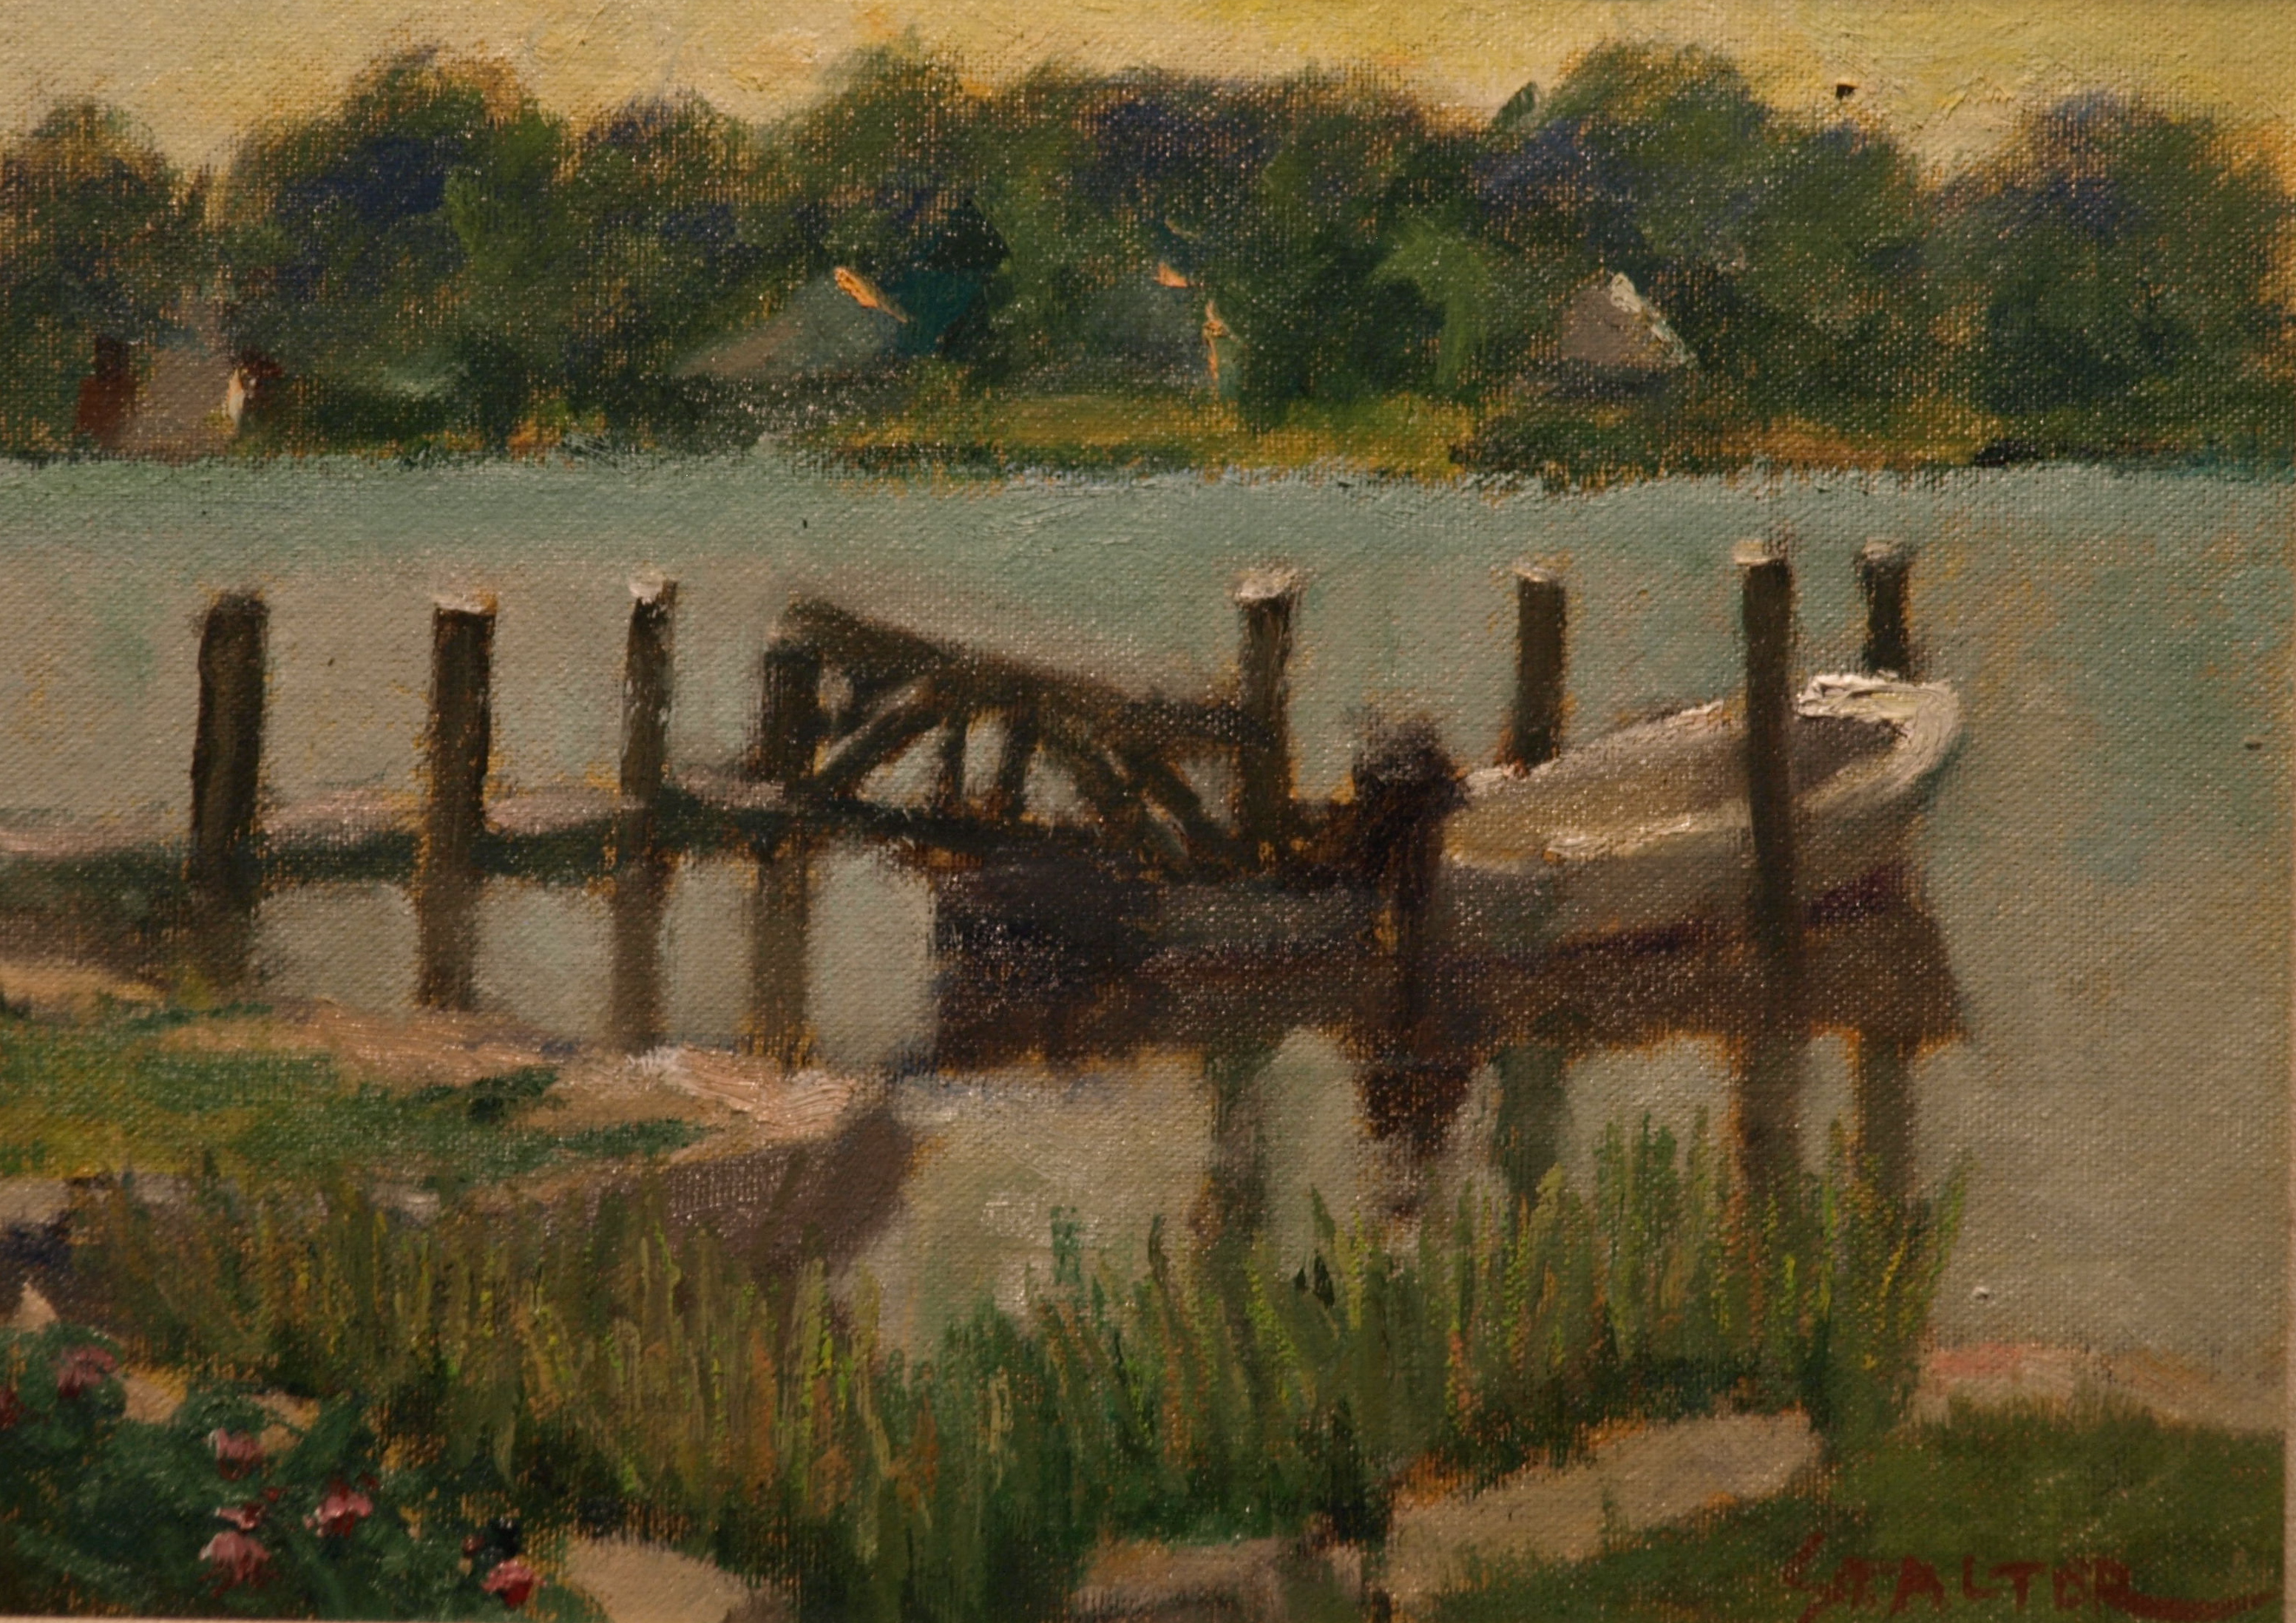 Mystic River Dock, Oil on Canvas on Panel, 9 x 12 Inches, by Richard Stalter, $225